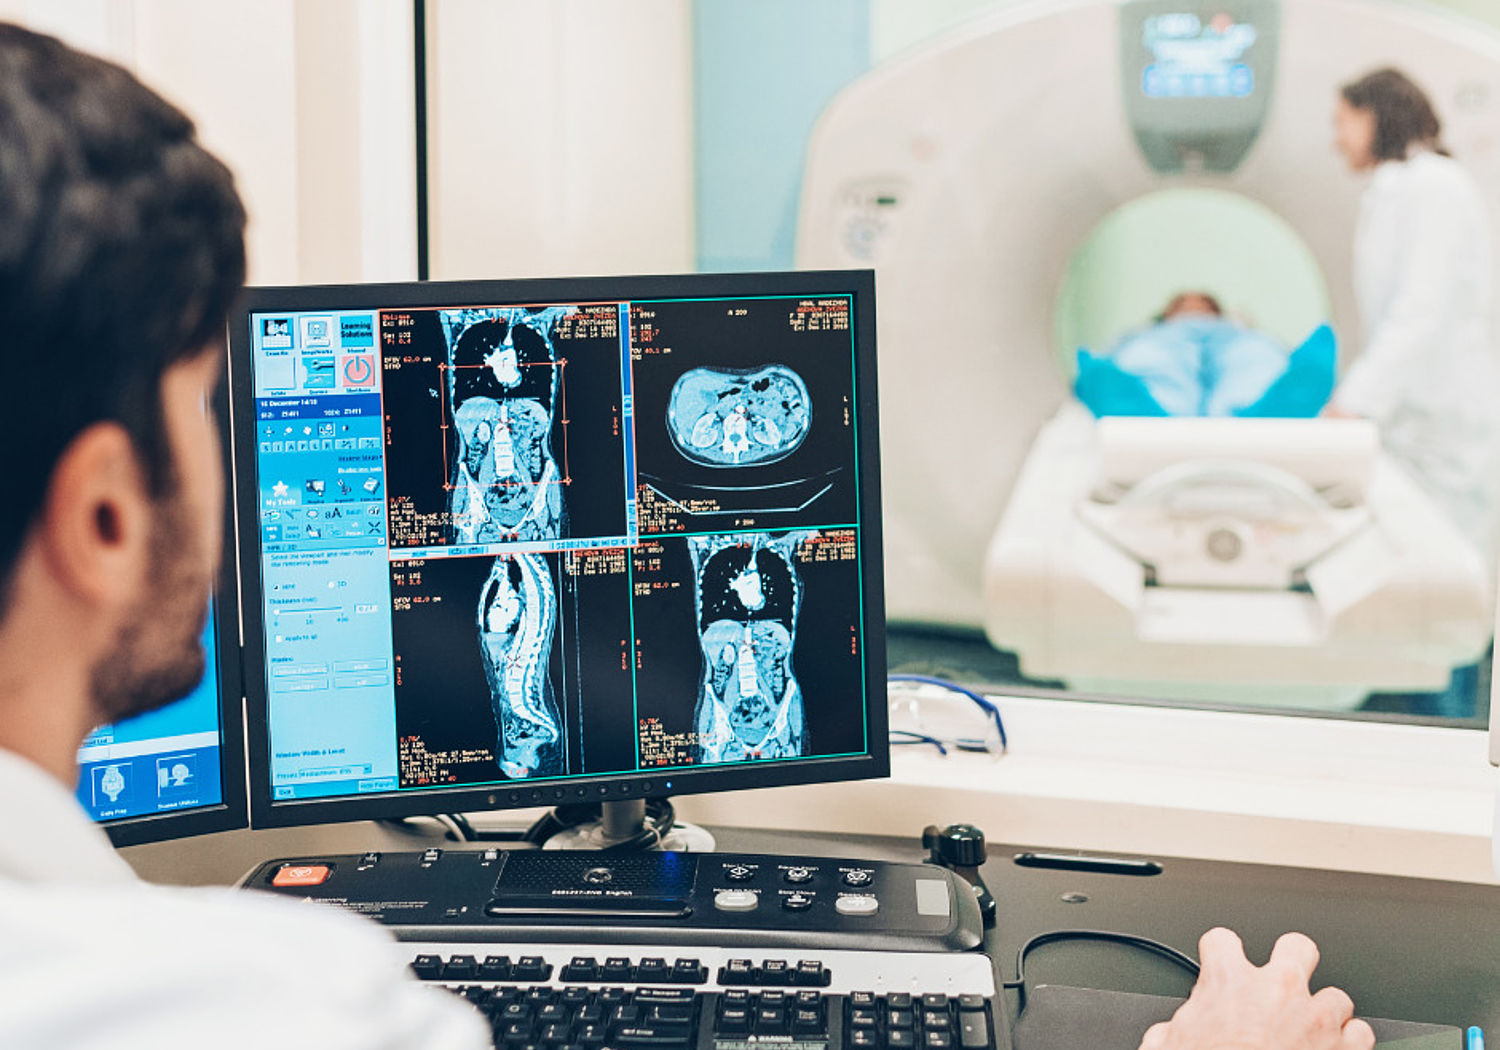 Image showing a doctor looking at a patient's MRI scan results